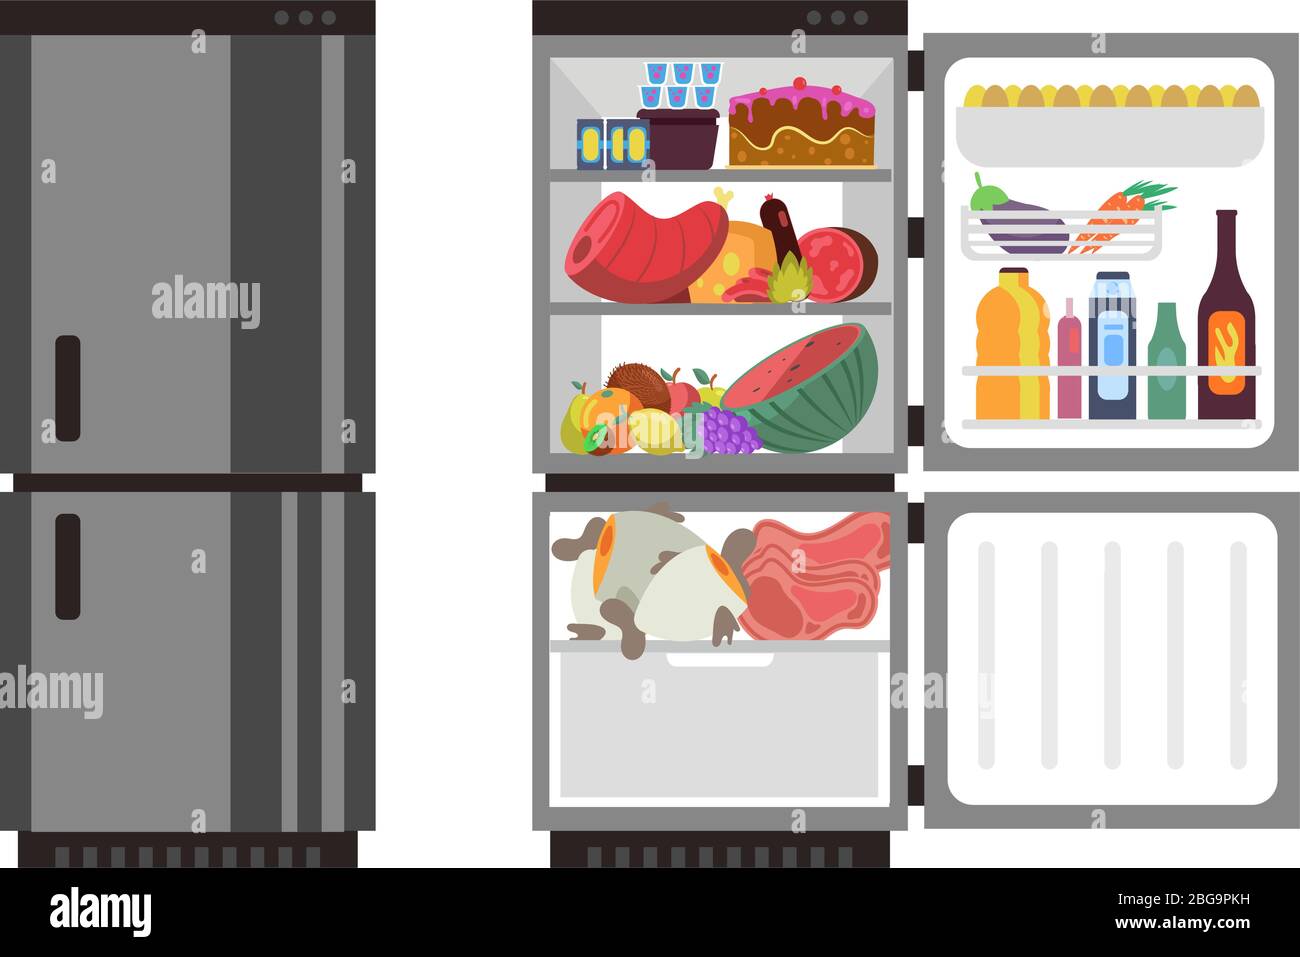 Open and close refrigerator. Kitchen fridge with food. Fridge with food, illustration of full refrigerator vector Stock Vector